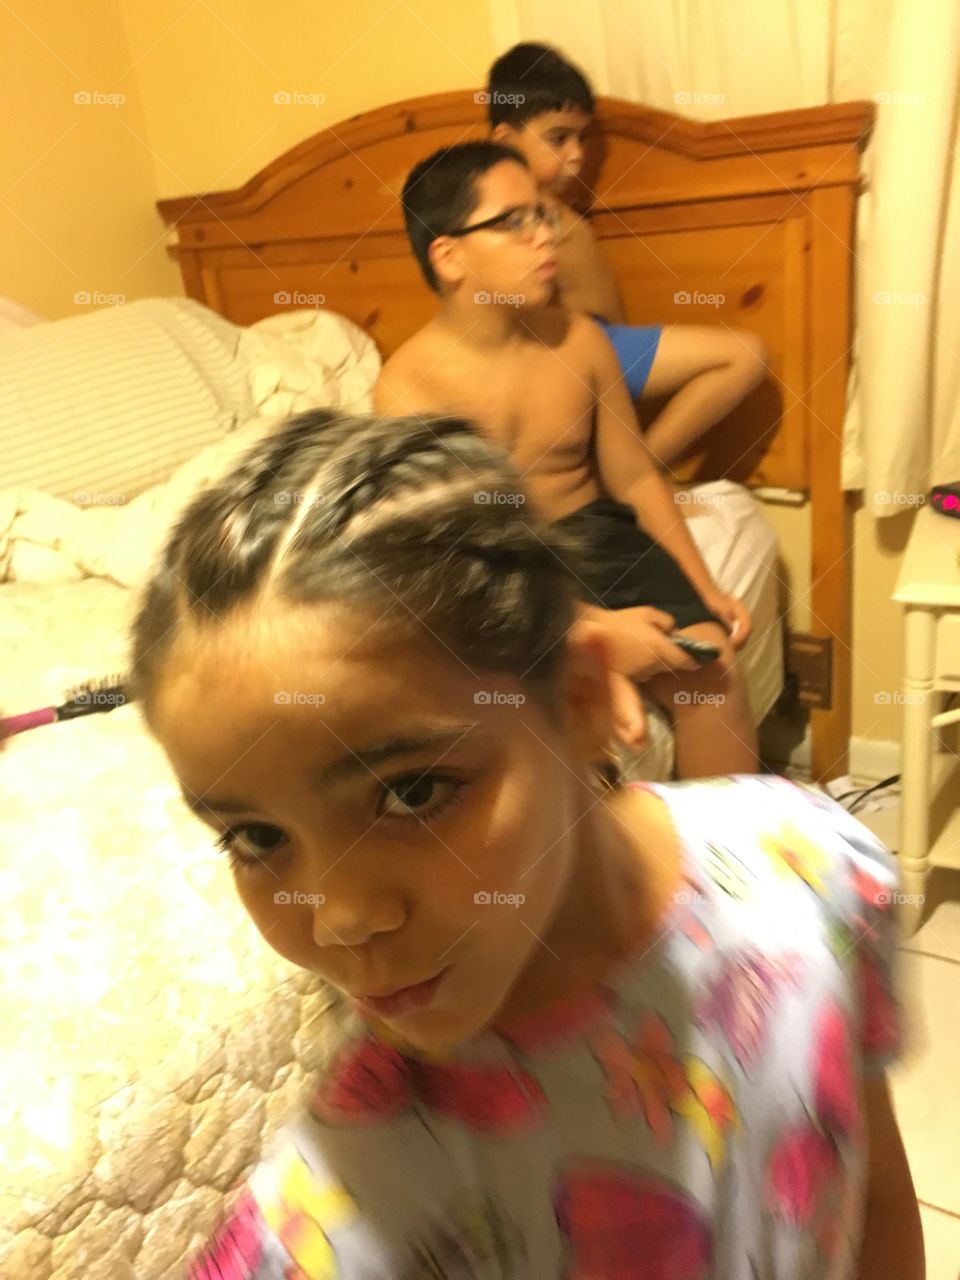 She wanted braids and now it has gone to her head